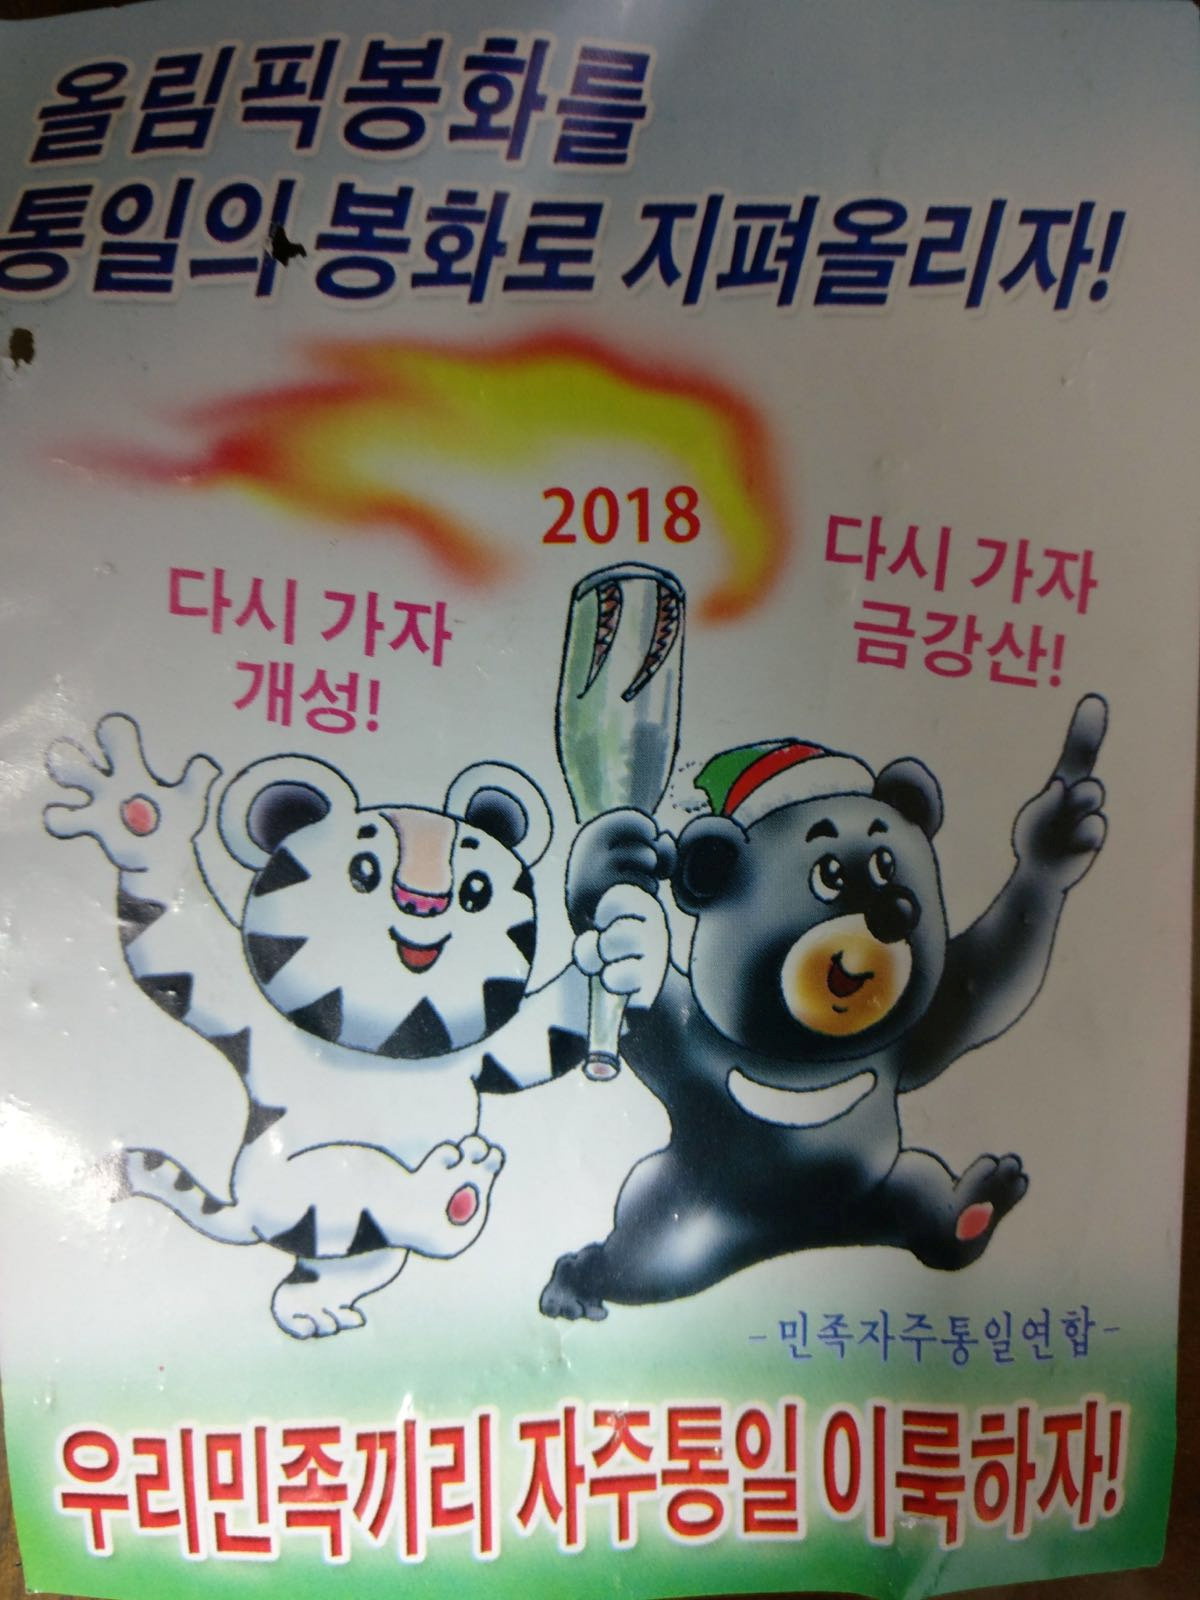 This is a poster released by the North Korean at the beginning of the 2018 Pyeong Chang Winter Olympics, persuading people about the unity of South and North Korea.